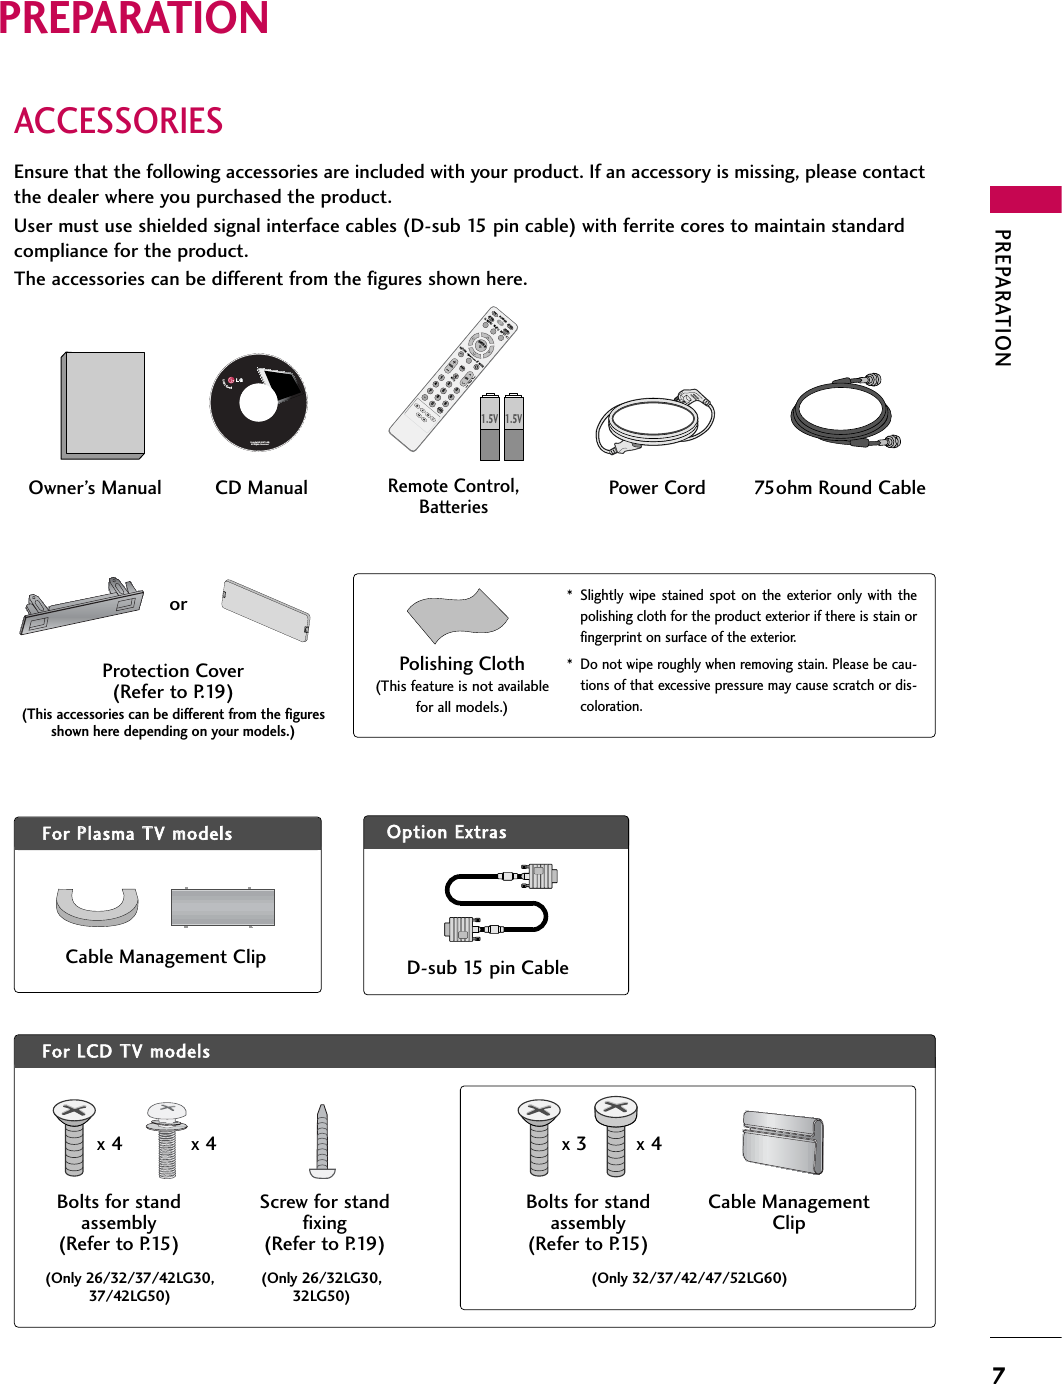 PREPARATION7PREPARATIONACCESSORIESEnsure that the following accessories are included with your product. If an accessory is missing, please contactthe dealer where you purchased the product. User must use shielded signal interface cables (D-sub 15 pin cable) with ferrite cores to maintain standardcompliance for the product.The accessories can be different from the figures shown here.Option EExtrasFor LLCD TTV mmodelsFor PPlasma TTV mmodelsCable Management ClipProtection Cover(Refer to P.19)(This accessories can be different from the figuresshown here depending on your models.)* Slightly wipe stained spot on the exterior only with thepolishing cloth for the product exterior if there is stain orfingerprint on surface of the exterior.* Do not wipe roughly when removing stain. Please be cau-tions of that excessive pressure may cause scratch or dis-coloration.Polishing Cloth(This feature is not availablefor all models.)Copyright© 2007 LGE,All Rights Reserved.D-sub 15 pin Cable1.5V 1.5VOwner’s Manual Power Cord 75ohm Round CableRemote Control,BatteriesINPUTFAVMUTETVSTBPOWERQ.MENU MENUAVMODERETURNENTERVOLCH1234567809FLASHBKPAGEDVDVCRCD Manual(Only 26/32/37/42LG30,37/42LG50)(Only 26/32LG30,32LG50)Bolts for standassembly(Refer to P.15)Screw for standfixing(Refer to P.19)x 4 x 4orCable ManagementClip(Only 32/37/42/47/52LG60)Bolts for standassembly(Refer to P.15)x 3 x 4